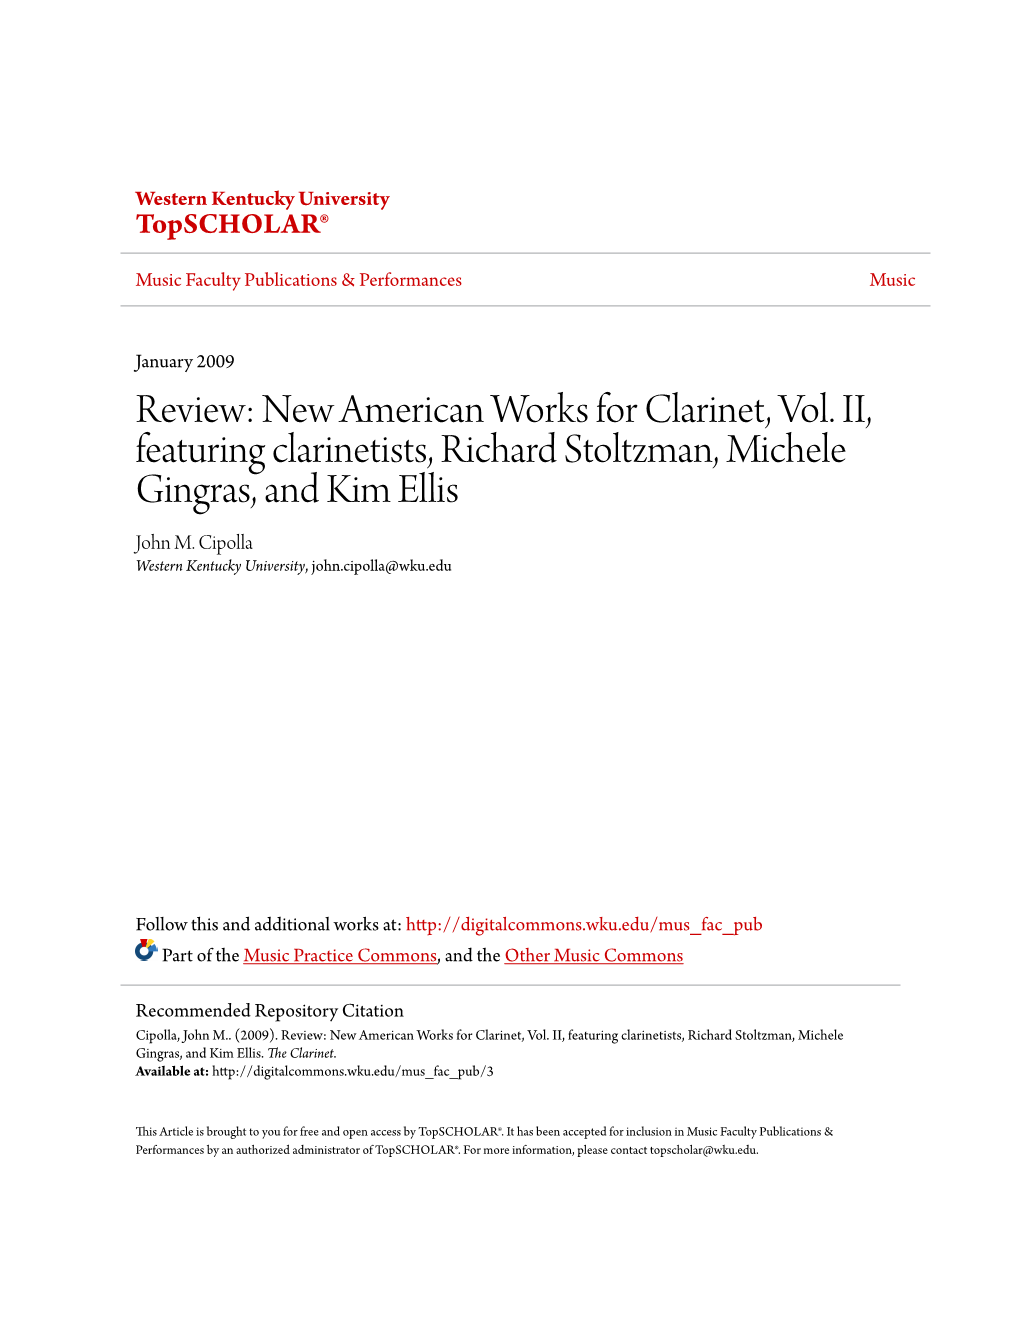 New American Works for Clarinet, Vol. II, Featuring Clarinetists, Richard Stoltzman, Michele Gingras, and Kim Ellis John M